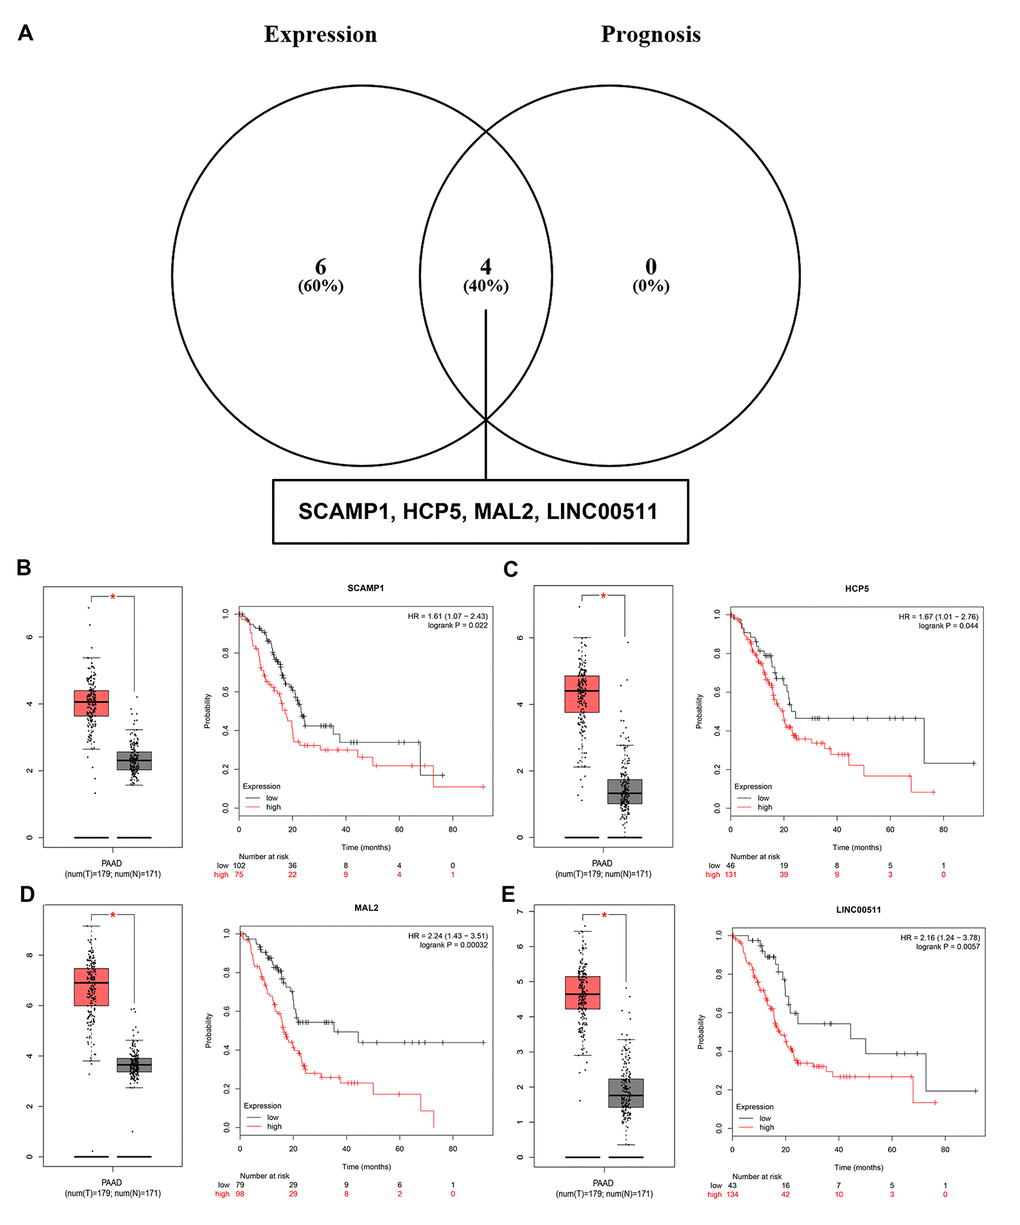 Screening the key lncRNAs in pancreatic cancer. (A) Identification of key lncRNAs among the predicted lncRNAs by combining expression and prognosis analyses using GEPIA and Kaplan Meier-plotter databases, respectively. (B) Expression and prognostic value of SCAMP1 in pancreatic cancer. (C) Expression and prognostic value of HCP5 in pancreatic cancer. (D) Expression and prognostic value of MAL2 in pancreatic cancer. (E) Expression and prognostic value of LINC00511 in pancreatic cancer.